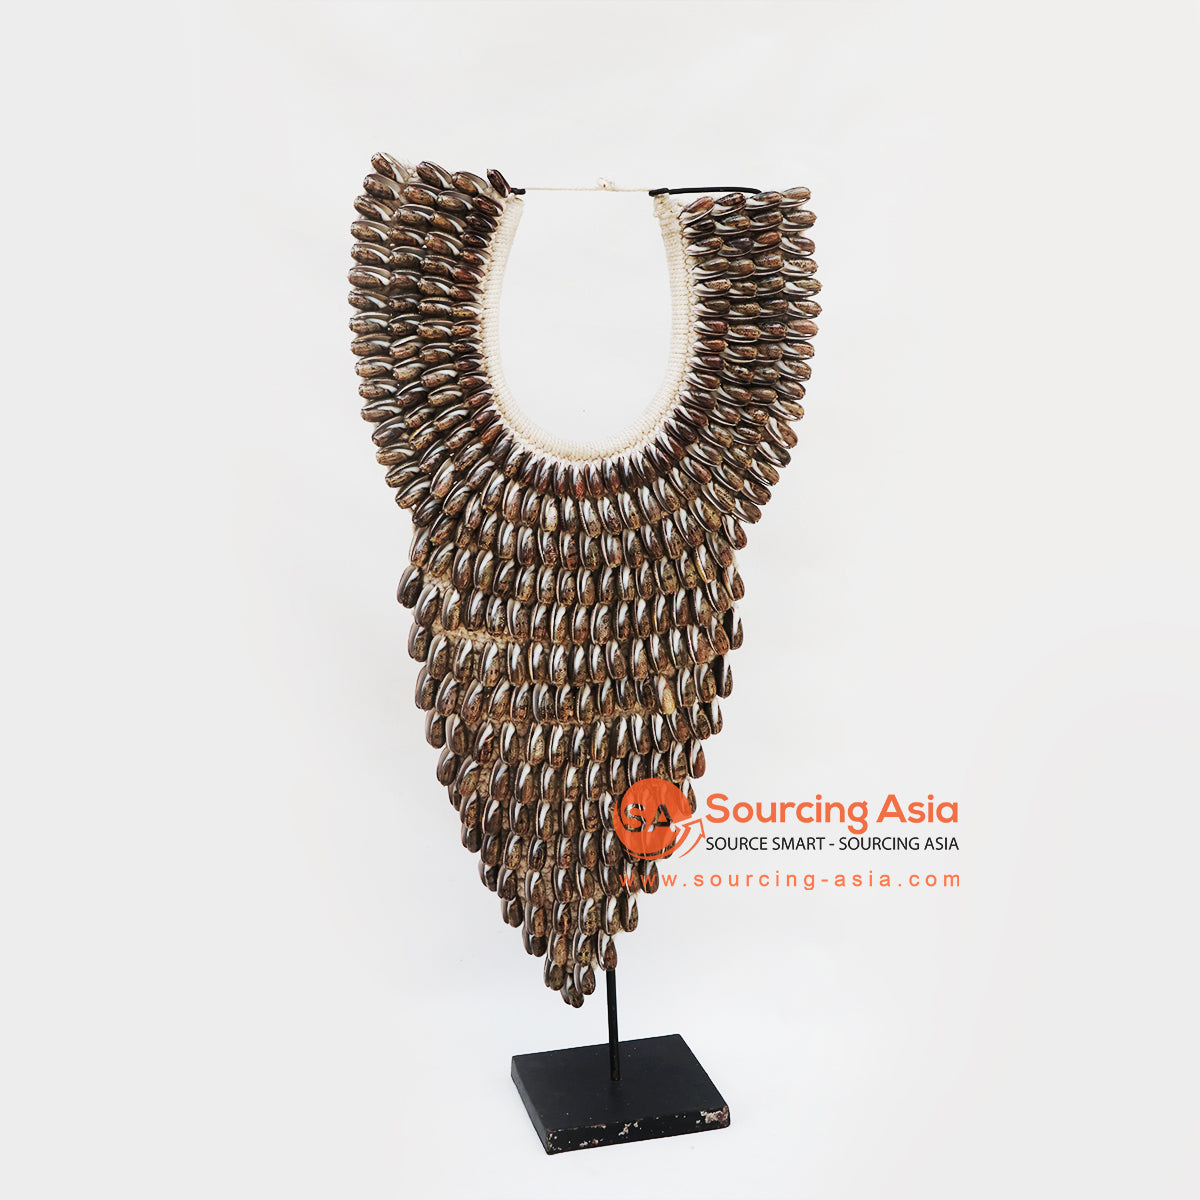 KNTC098 BROWN SHELL PAPUA TRIBAL STYLE NECKLACE ON STAND DECORATION